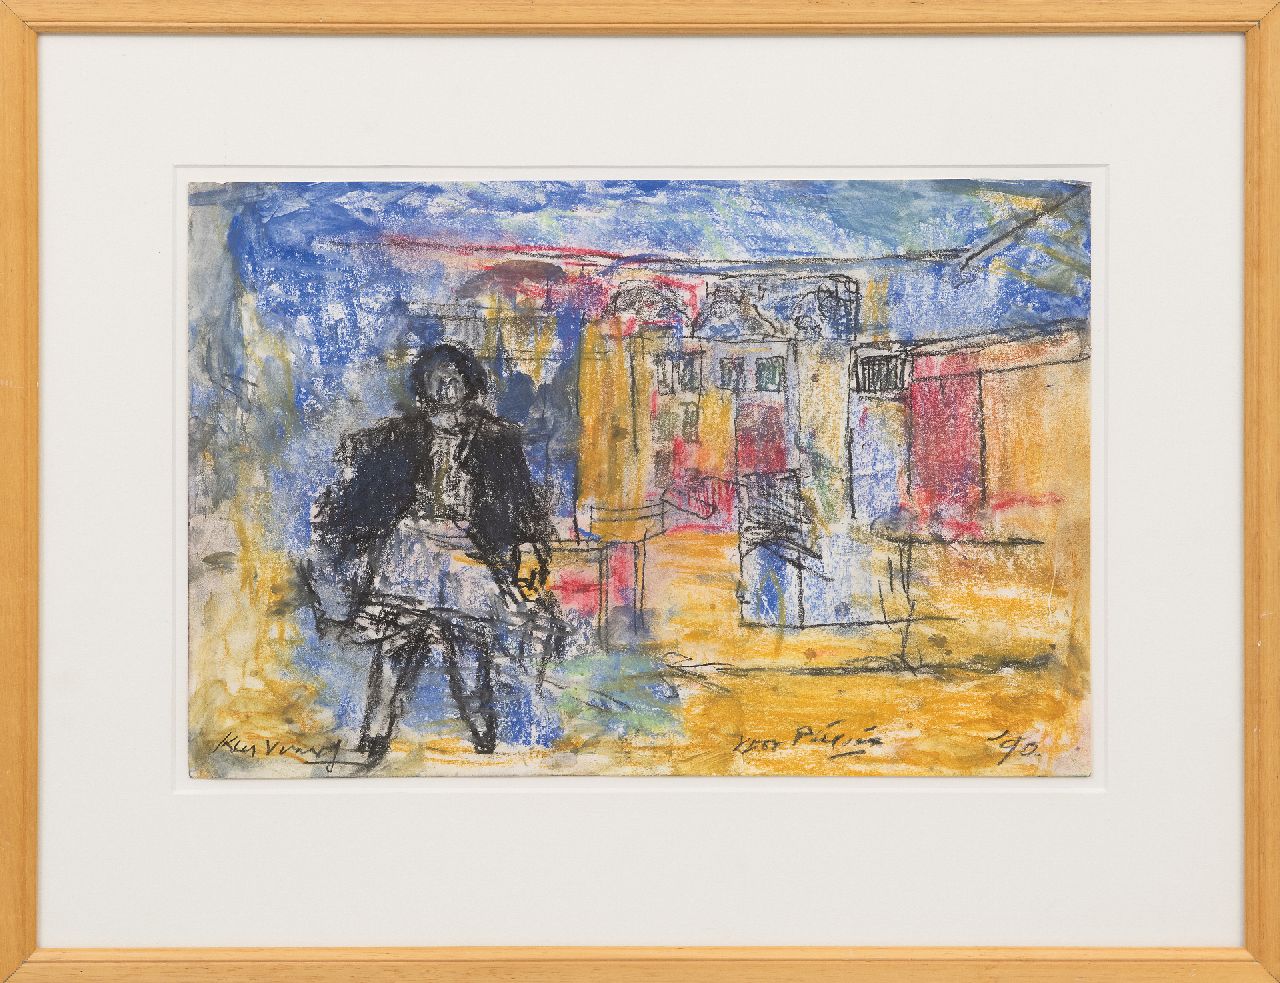 Verwey K.  | Kees Verwey | Watercolours and drawings offered for sale | Woman in a street, chalk and watercolour on paper 26.8 x 39.8 cm, signed l.l. and dated '90